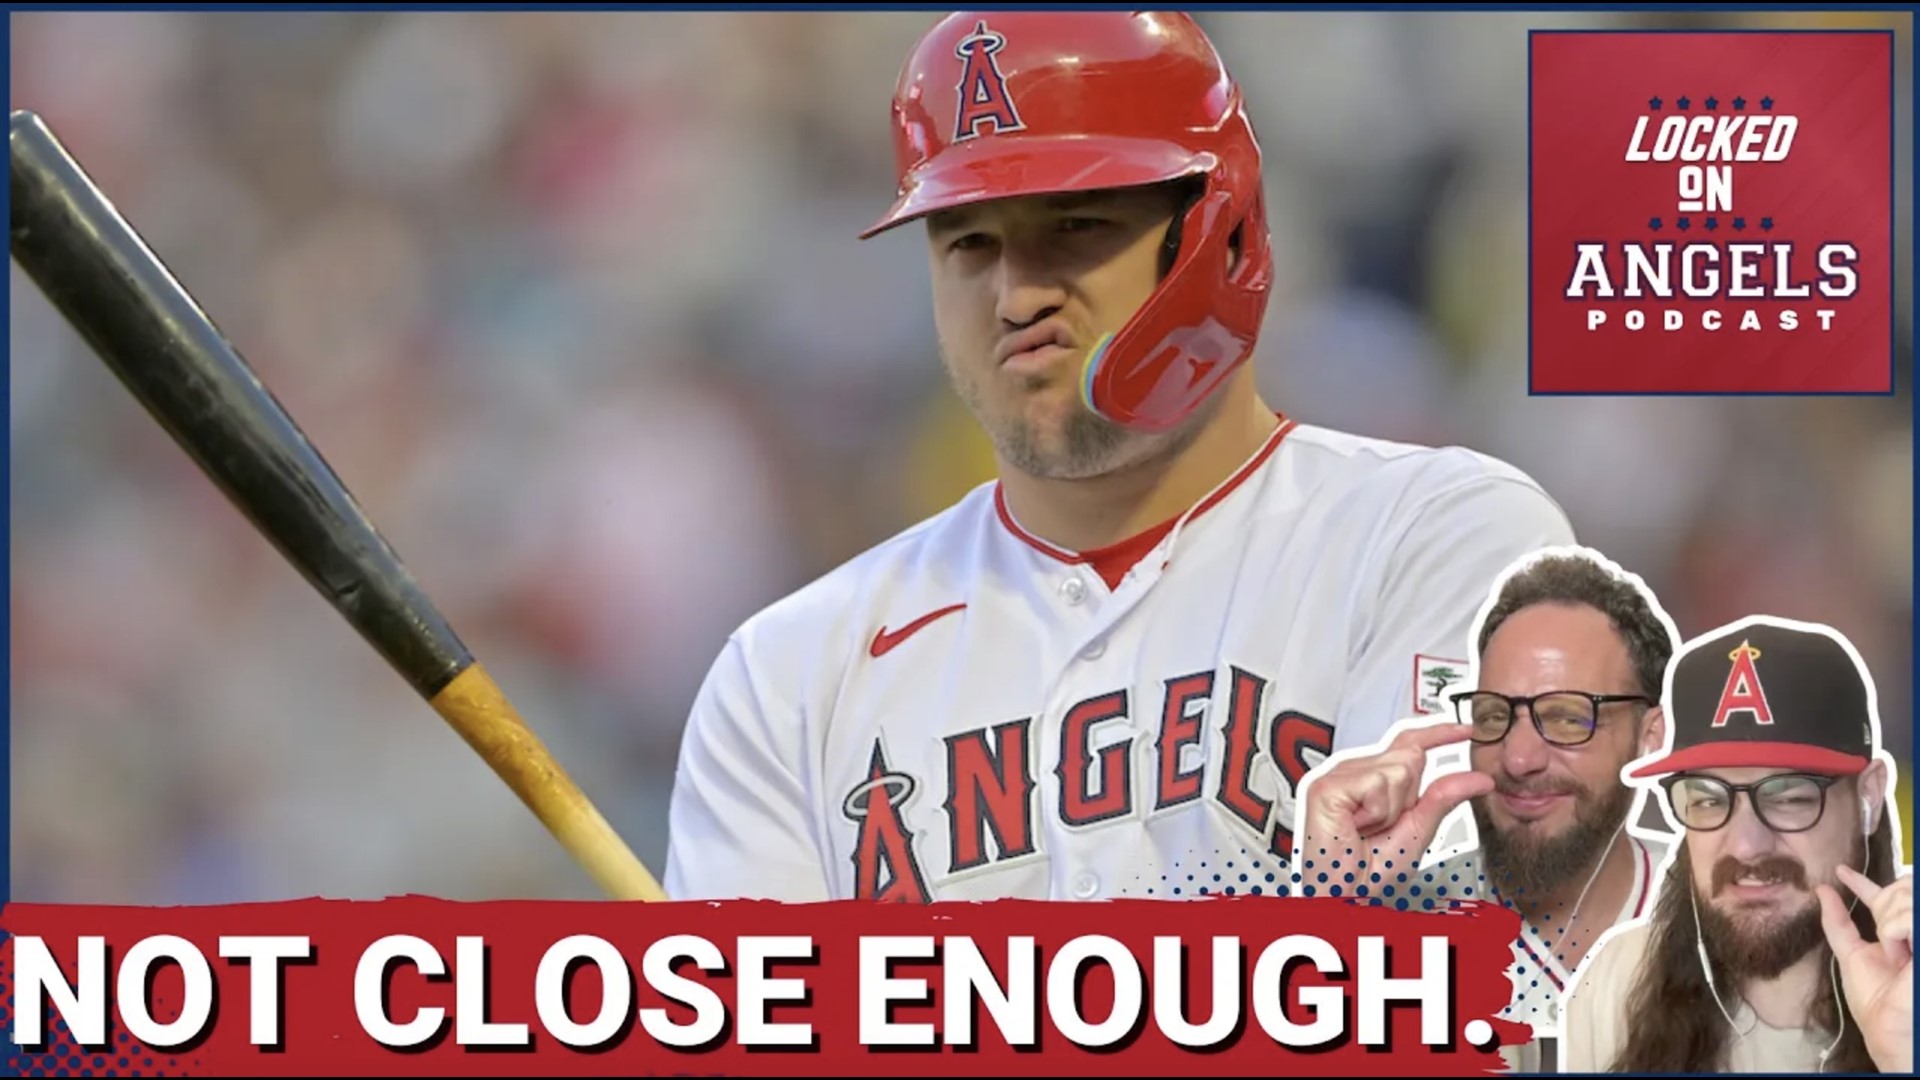 The Los Angeles Angels were unable to overcome a 4-2 final score against the Baltimore Orioles on Monday night